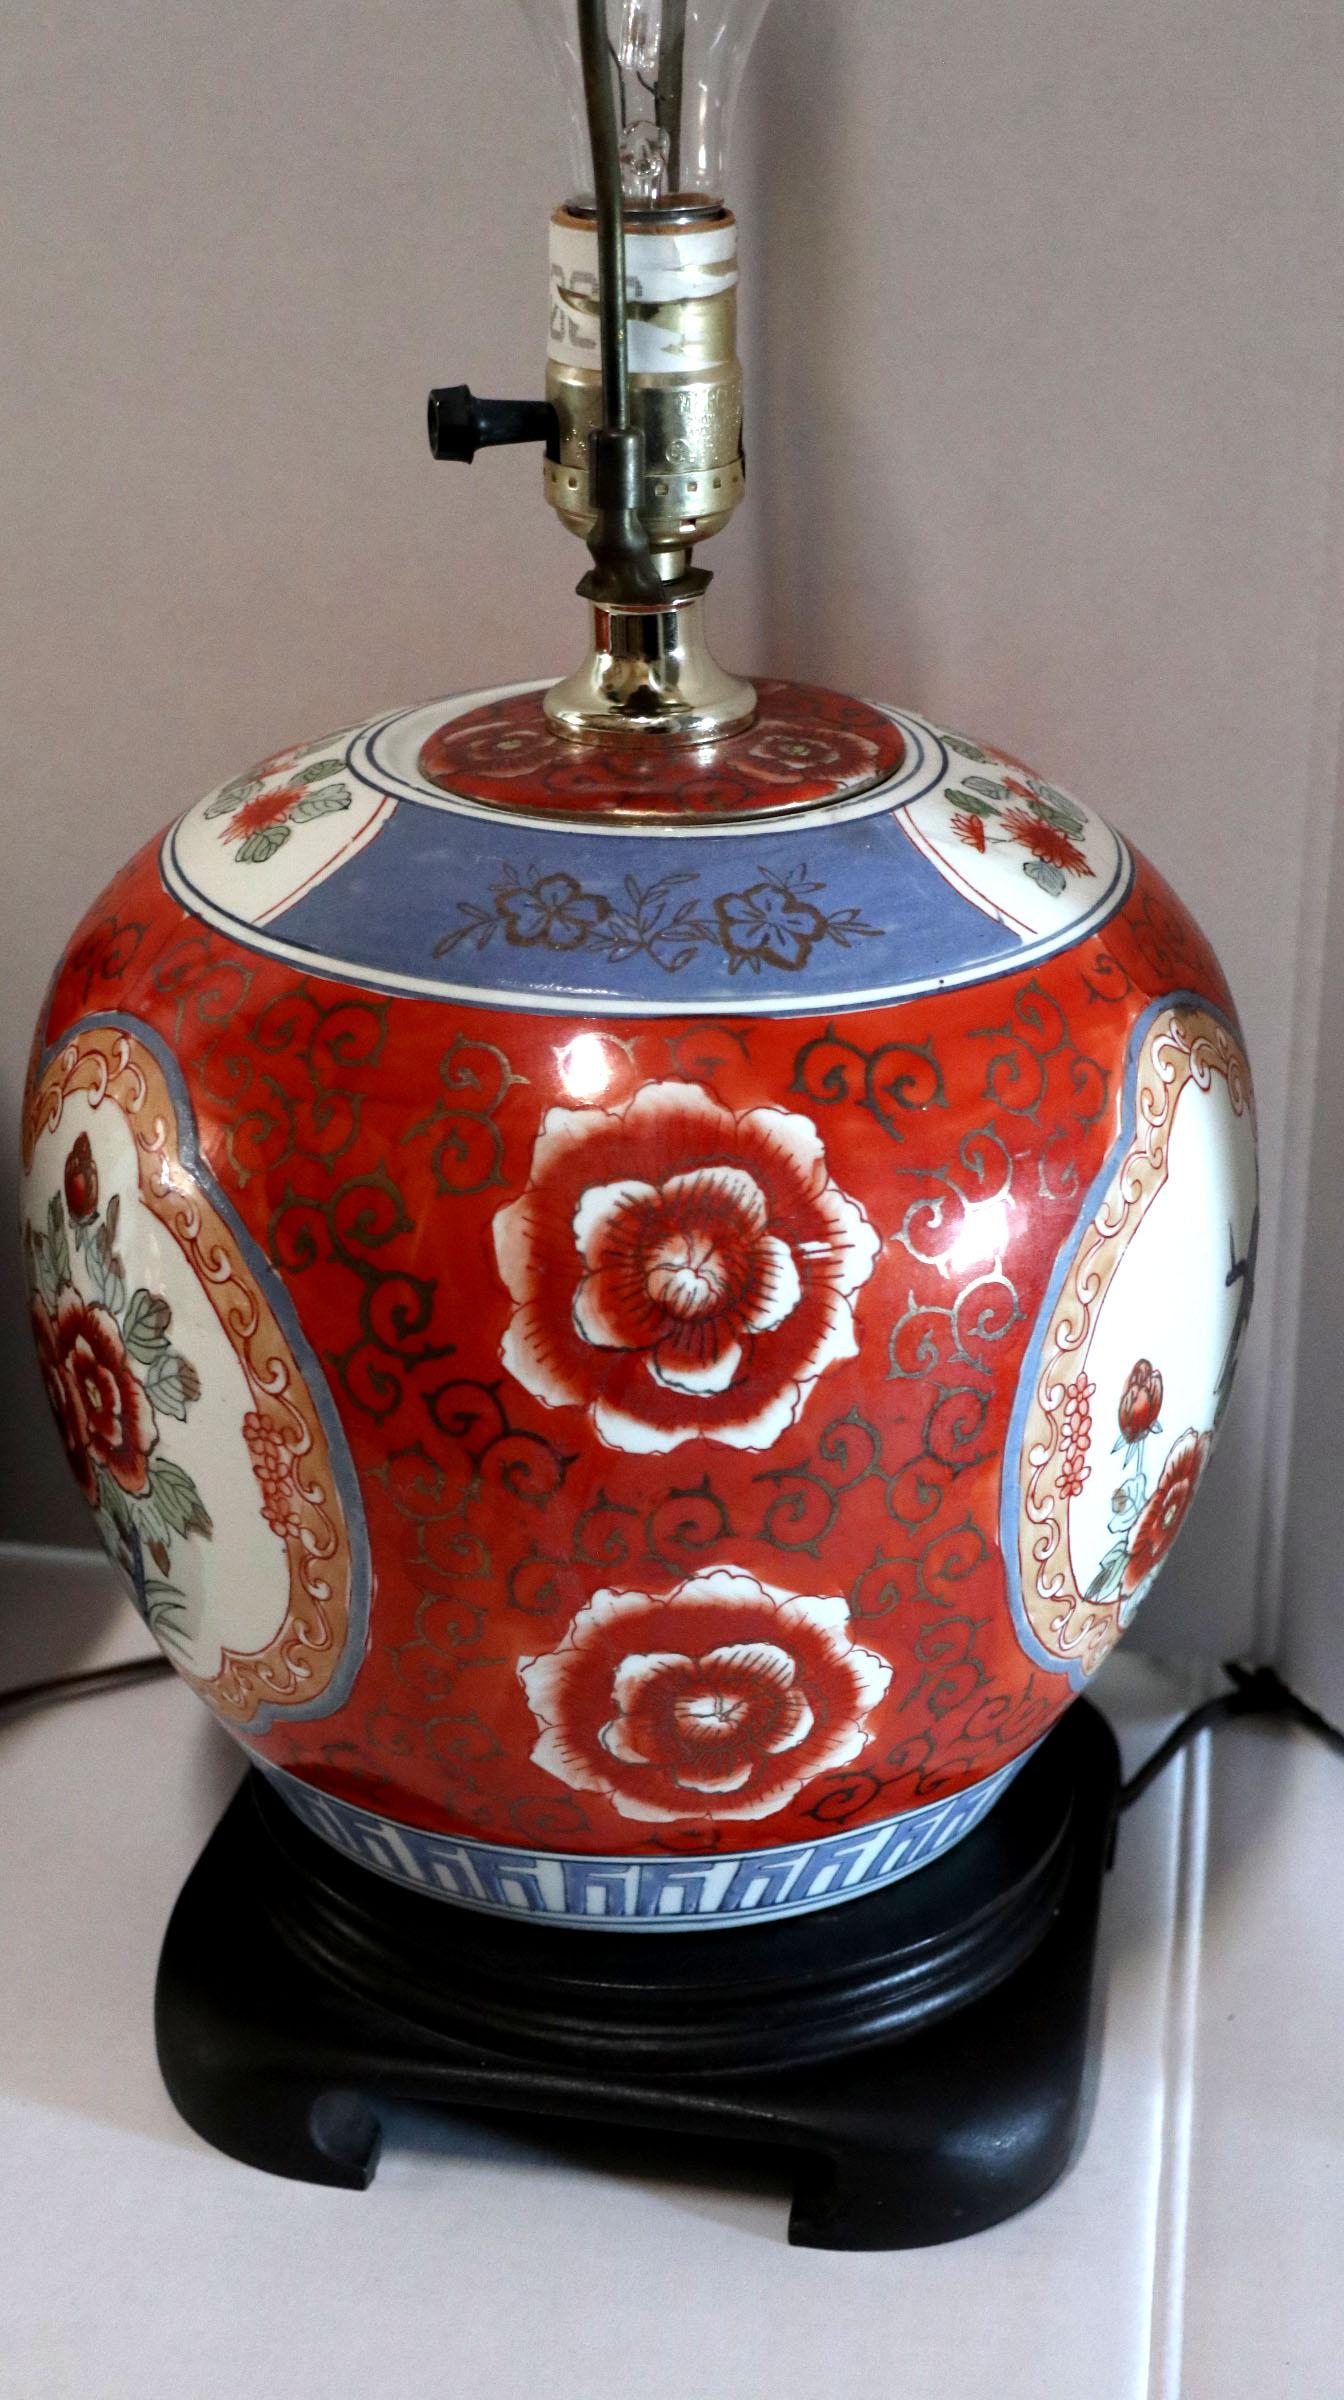 Hand-Painted Imari Pattern Lamps, Style of Wildwood, a Near Pair on Wood Base